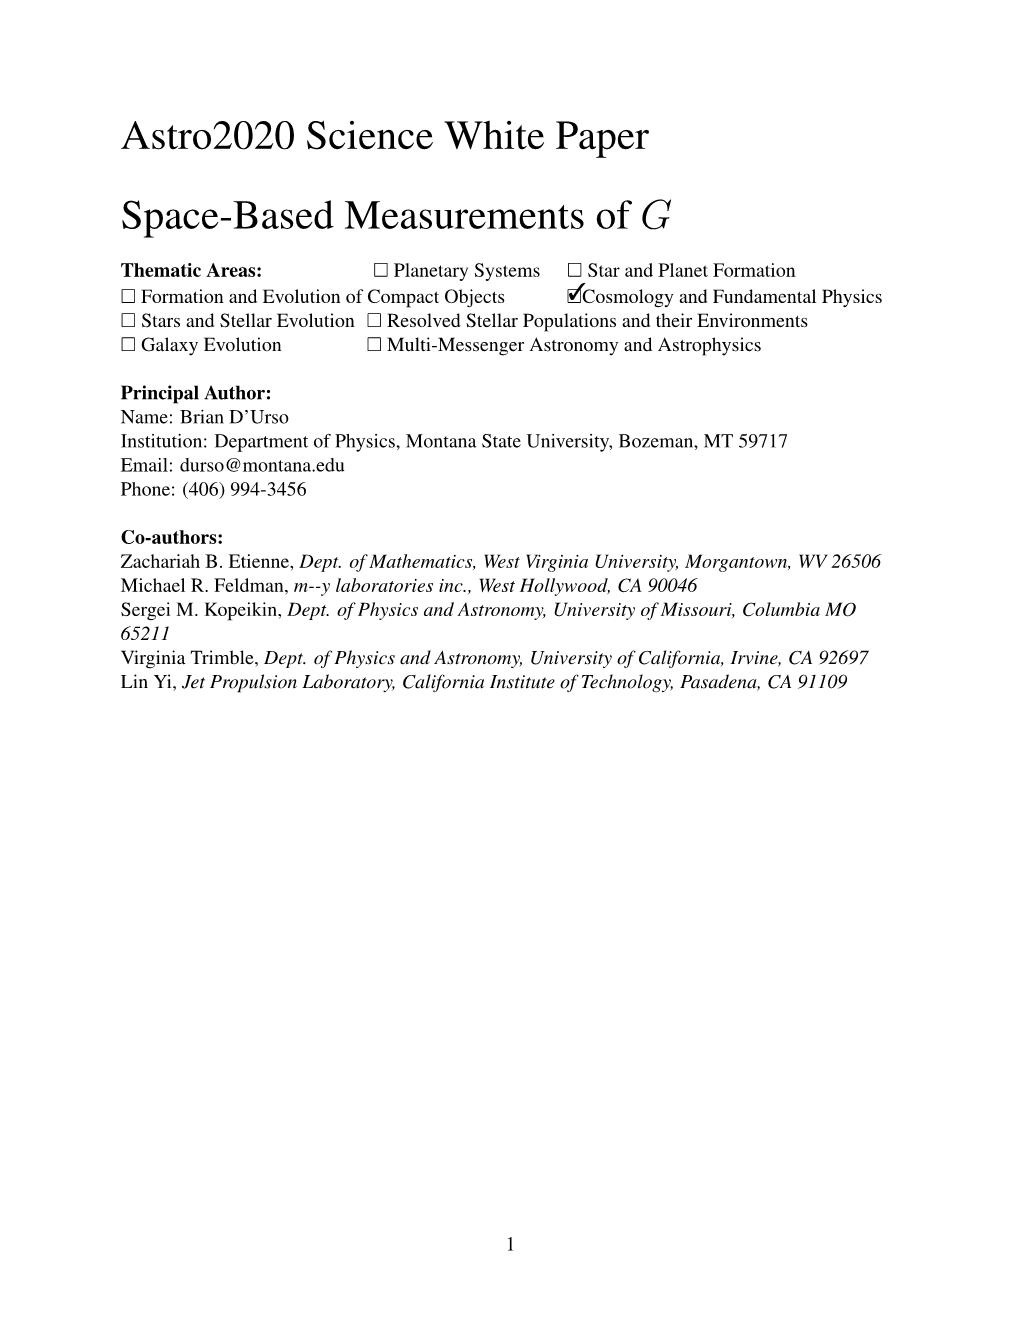 Astro2020 Science White Paper Space-Based Measurements of G